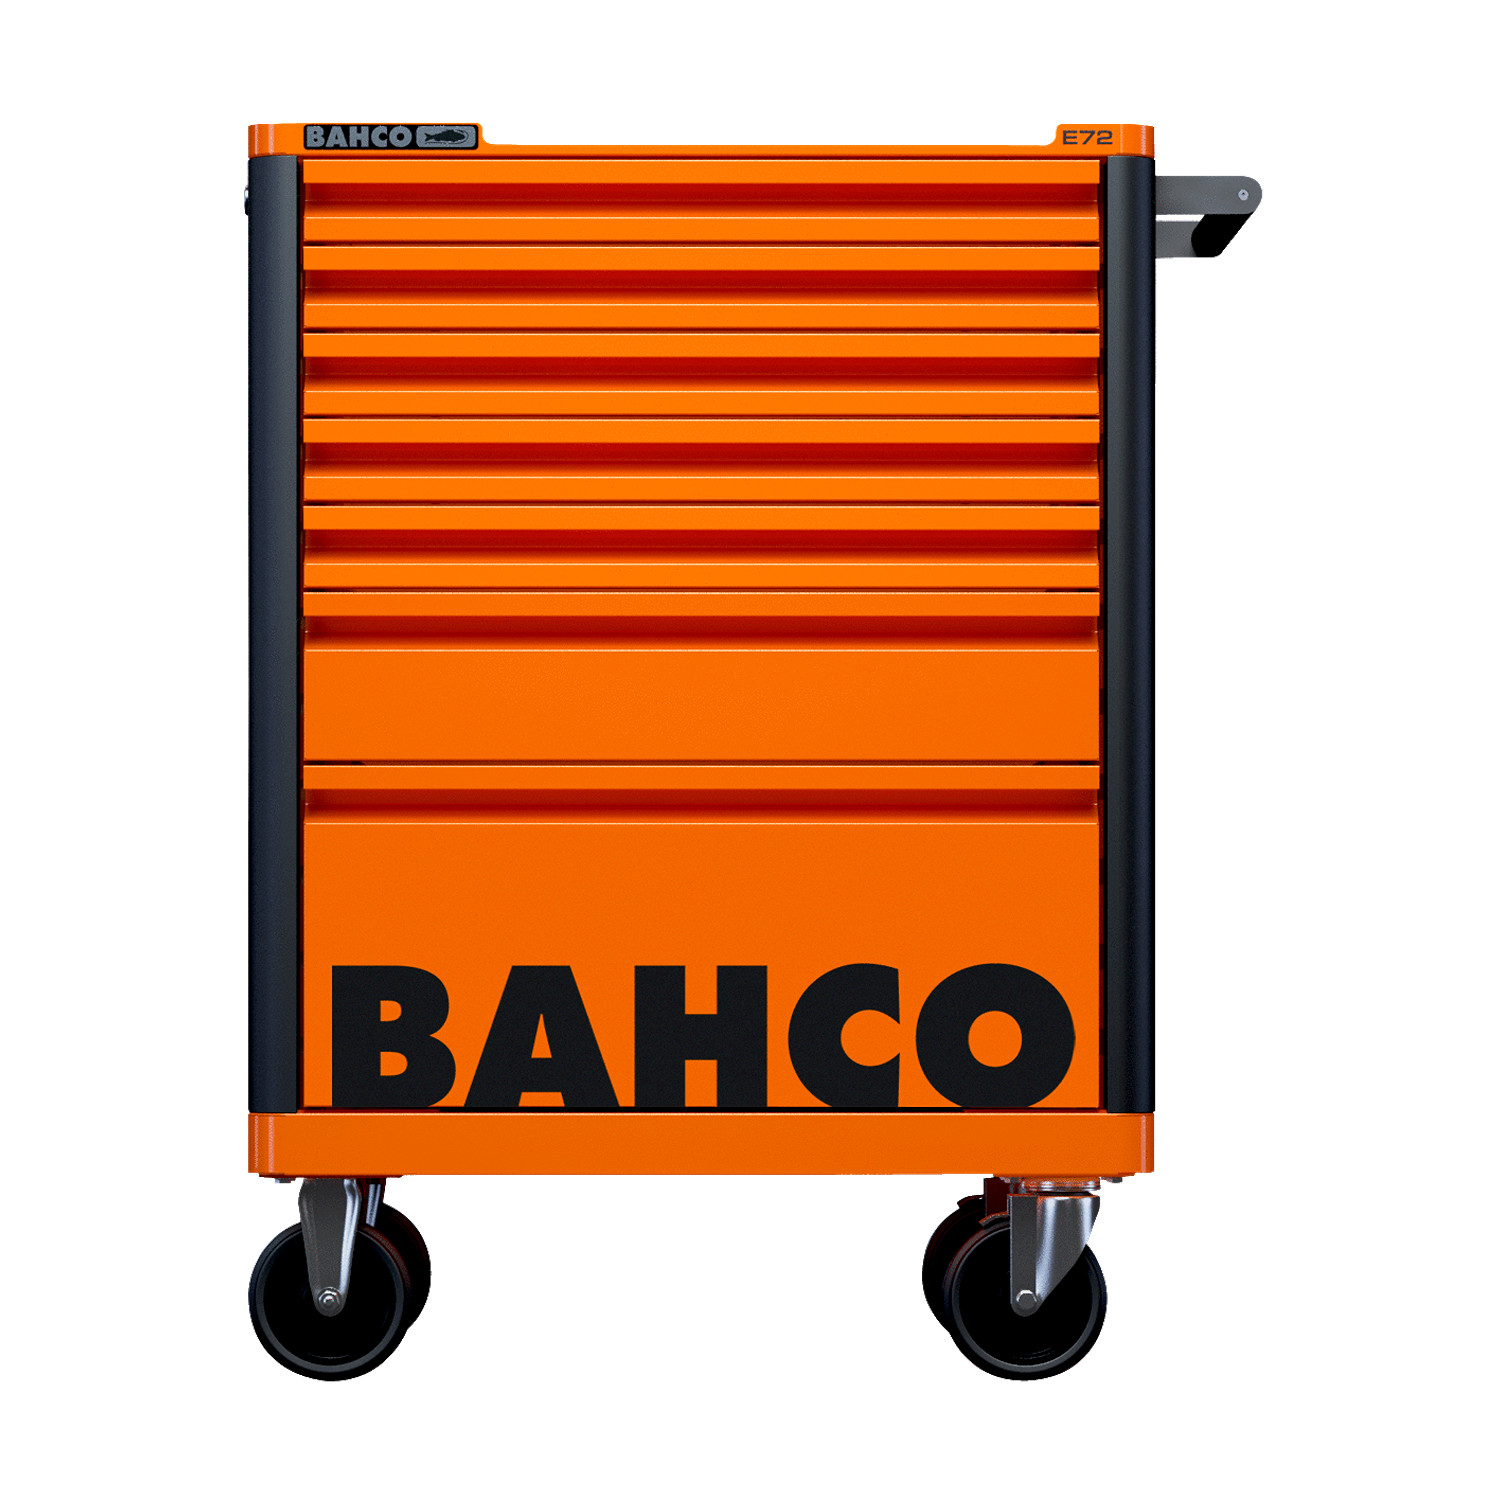 BAHCO 1472K7 26” E72 Storage HUB Tool Trolleys with 7 Drawers - Premium Tool Trolley from BAHCO - Shop now at Yew Aik.